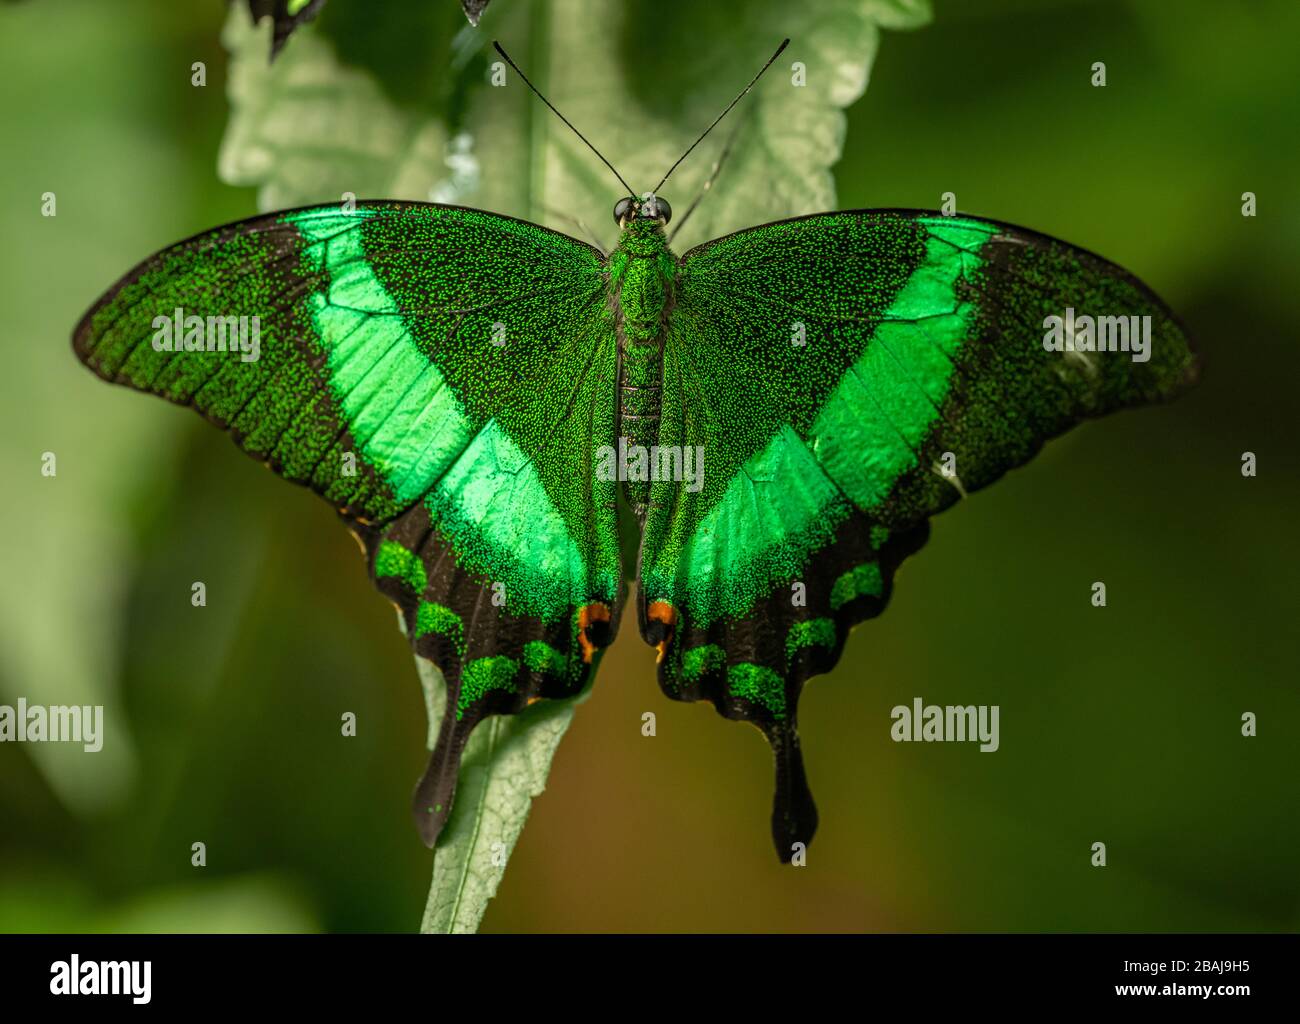 green tropical butterfly Emerald Swallowtail (Papilio palinurus) sitting opened on a leaf, animal insect macro Stock Photo